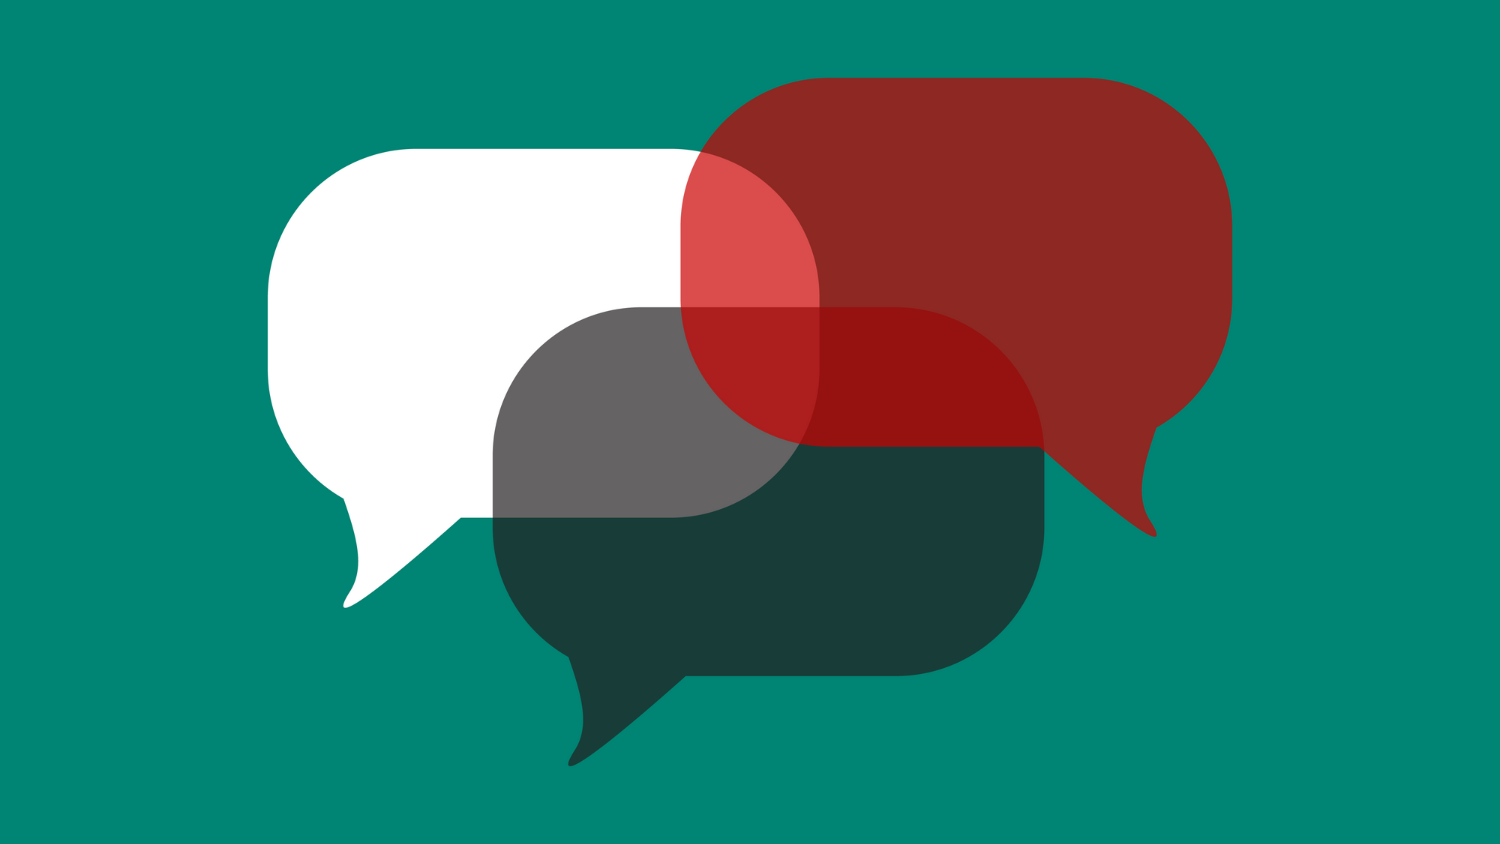 Three different colored speech bubbles - white, black, red - on a teal background.